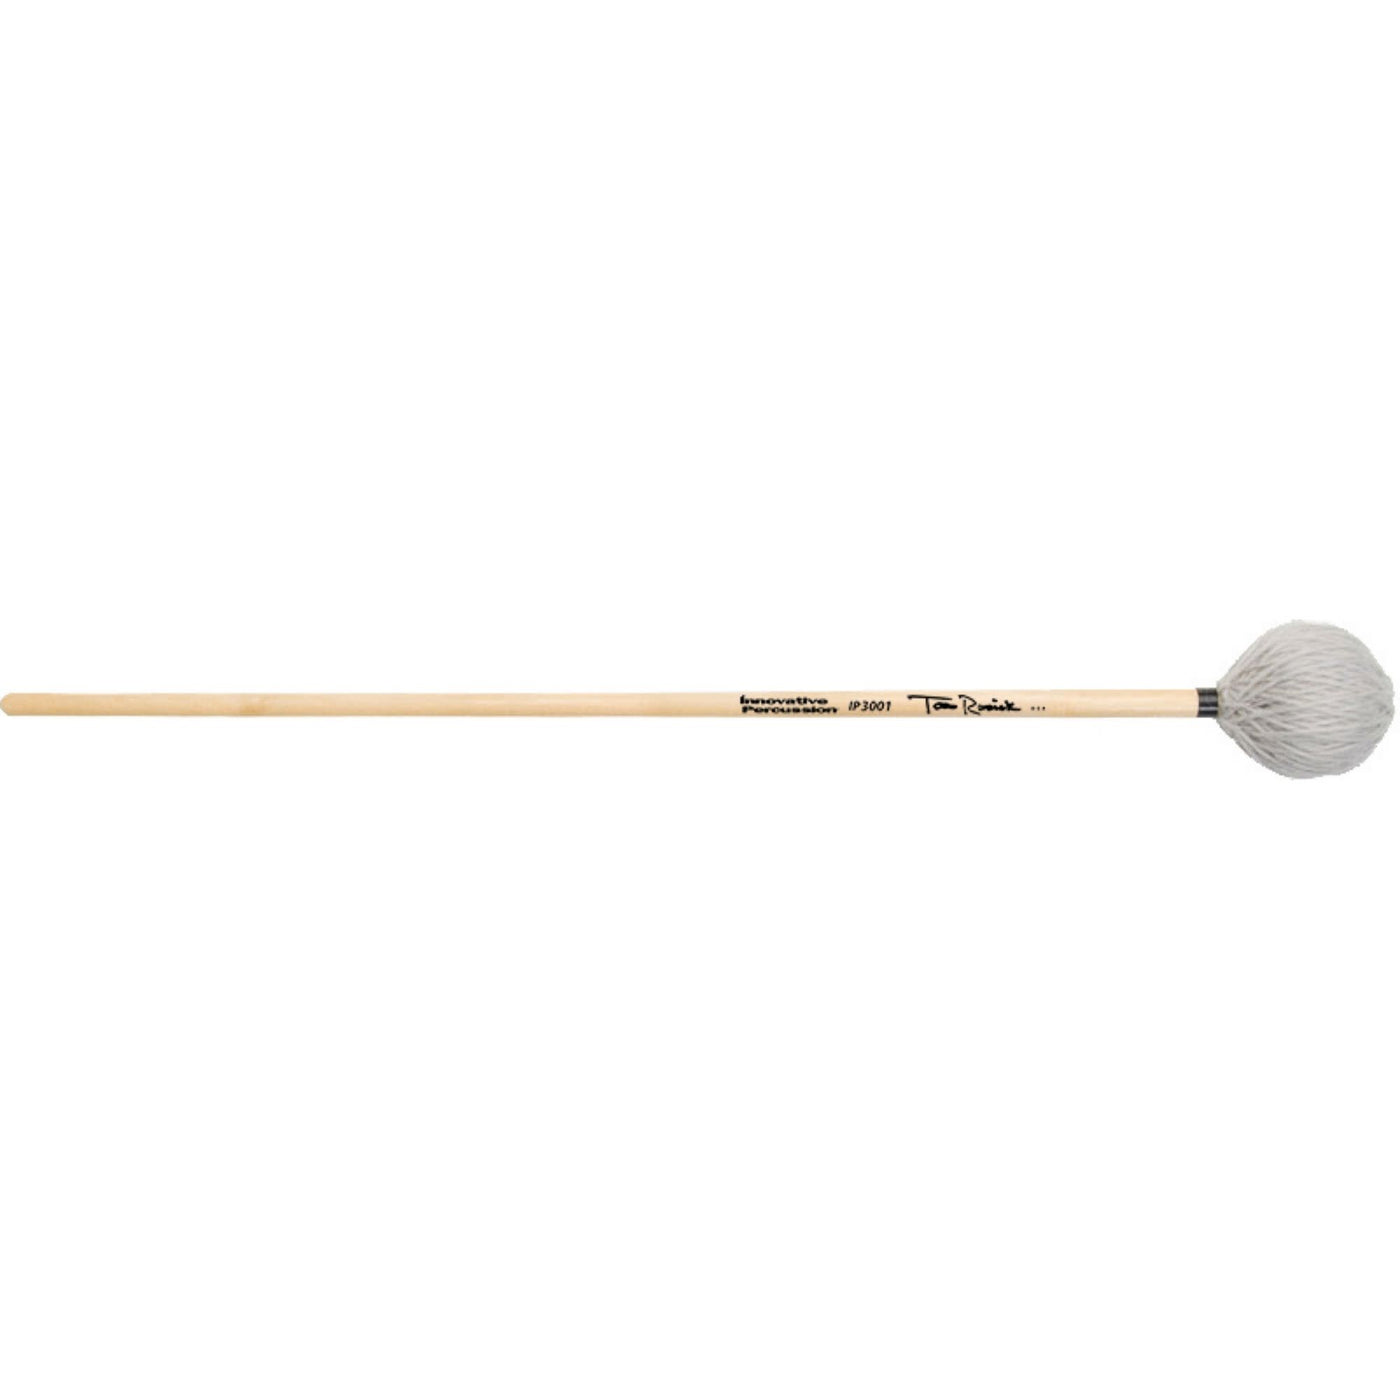 Innovative Percussion IP3001 Keyboard Mallet